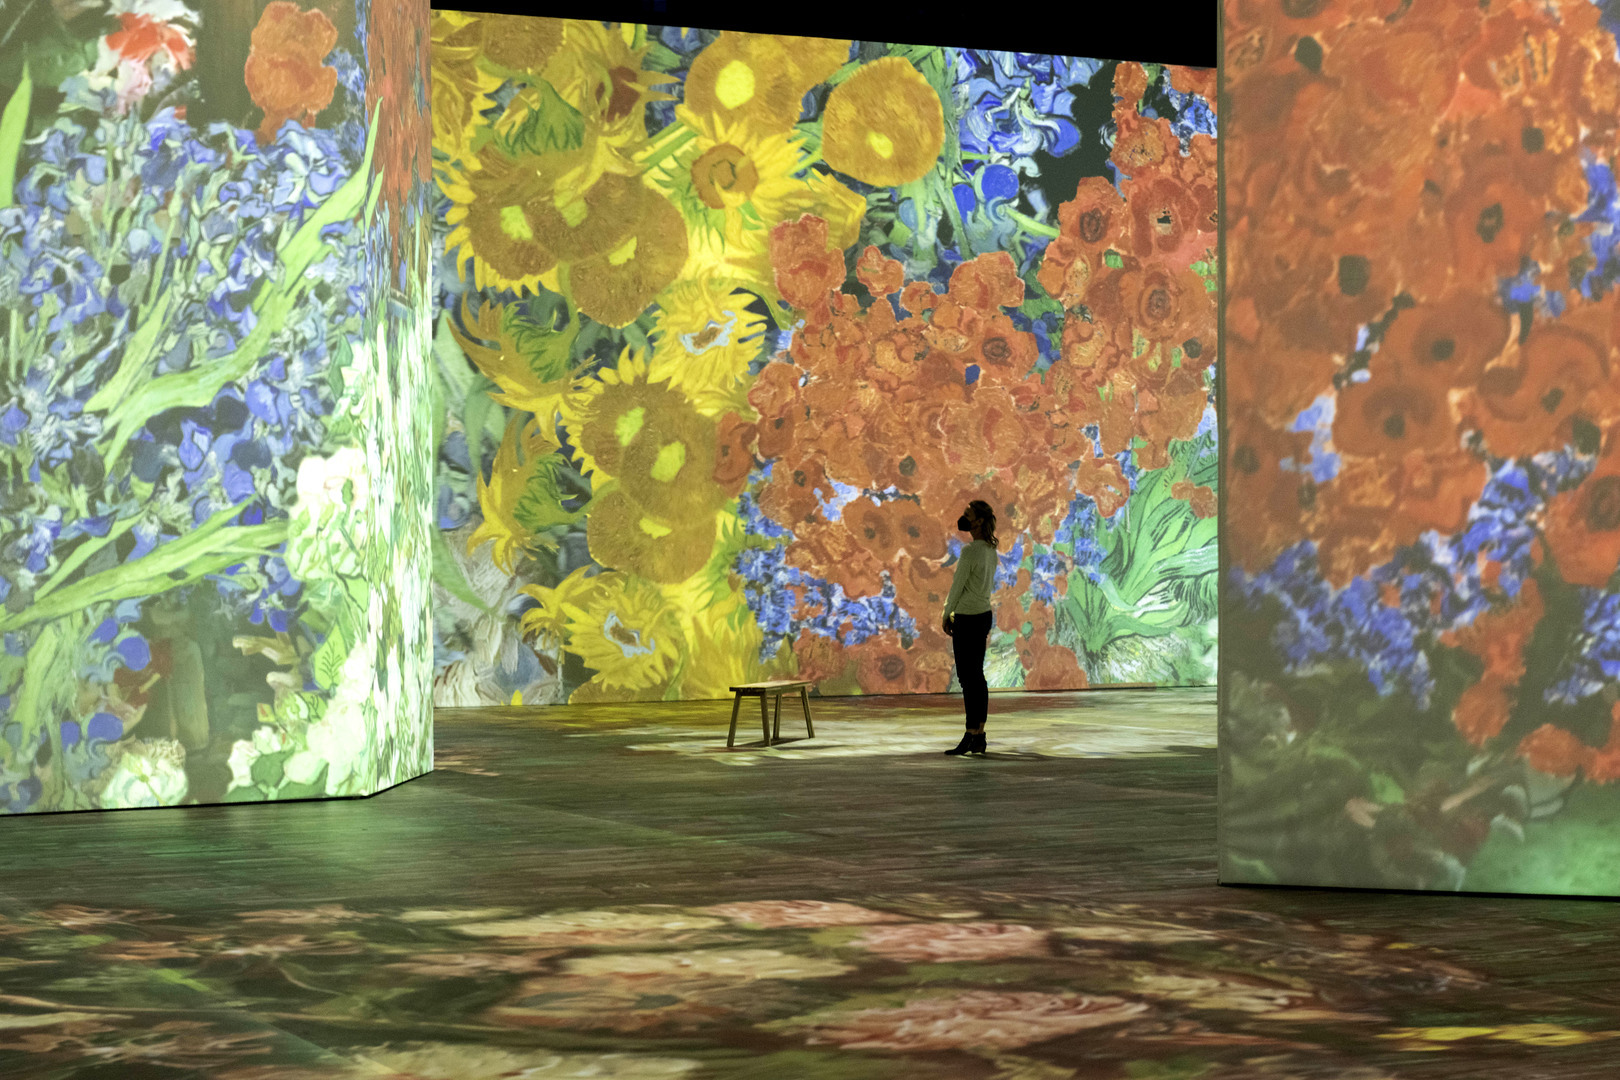 Beyond Van Gogh: The Immersive Experience, Council Bluffs, Iowa, United States